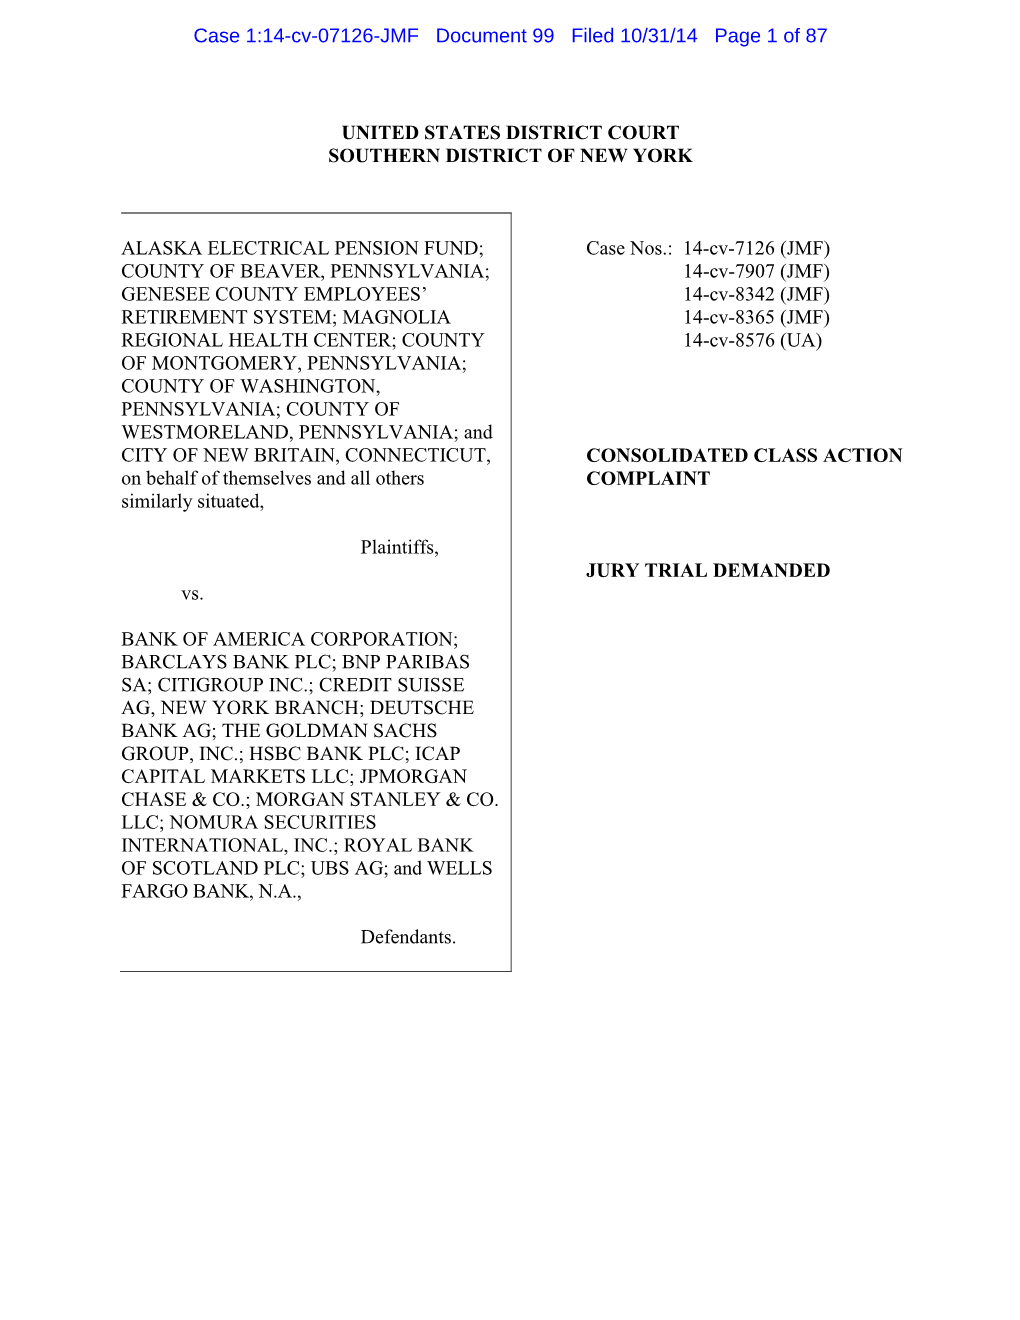 Consolidated Amended Complaint